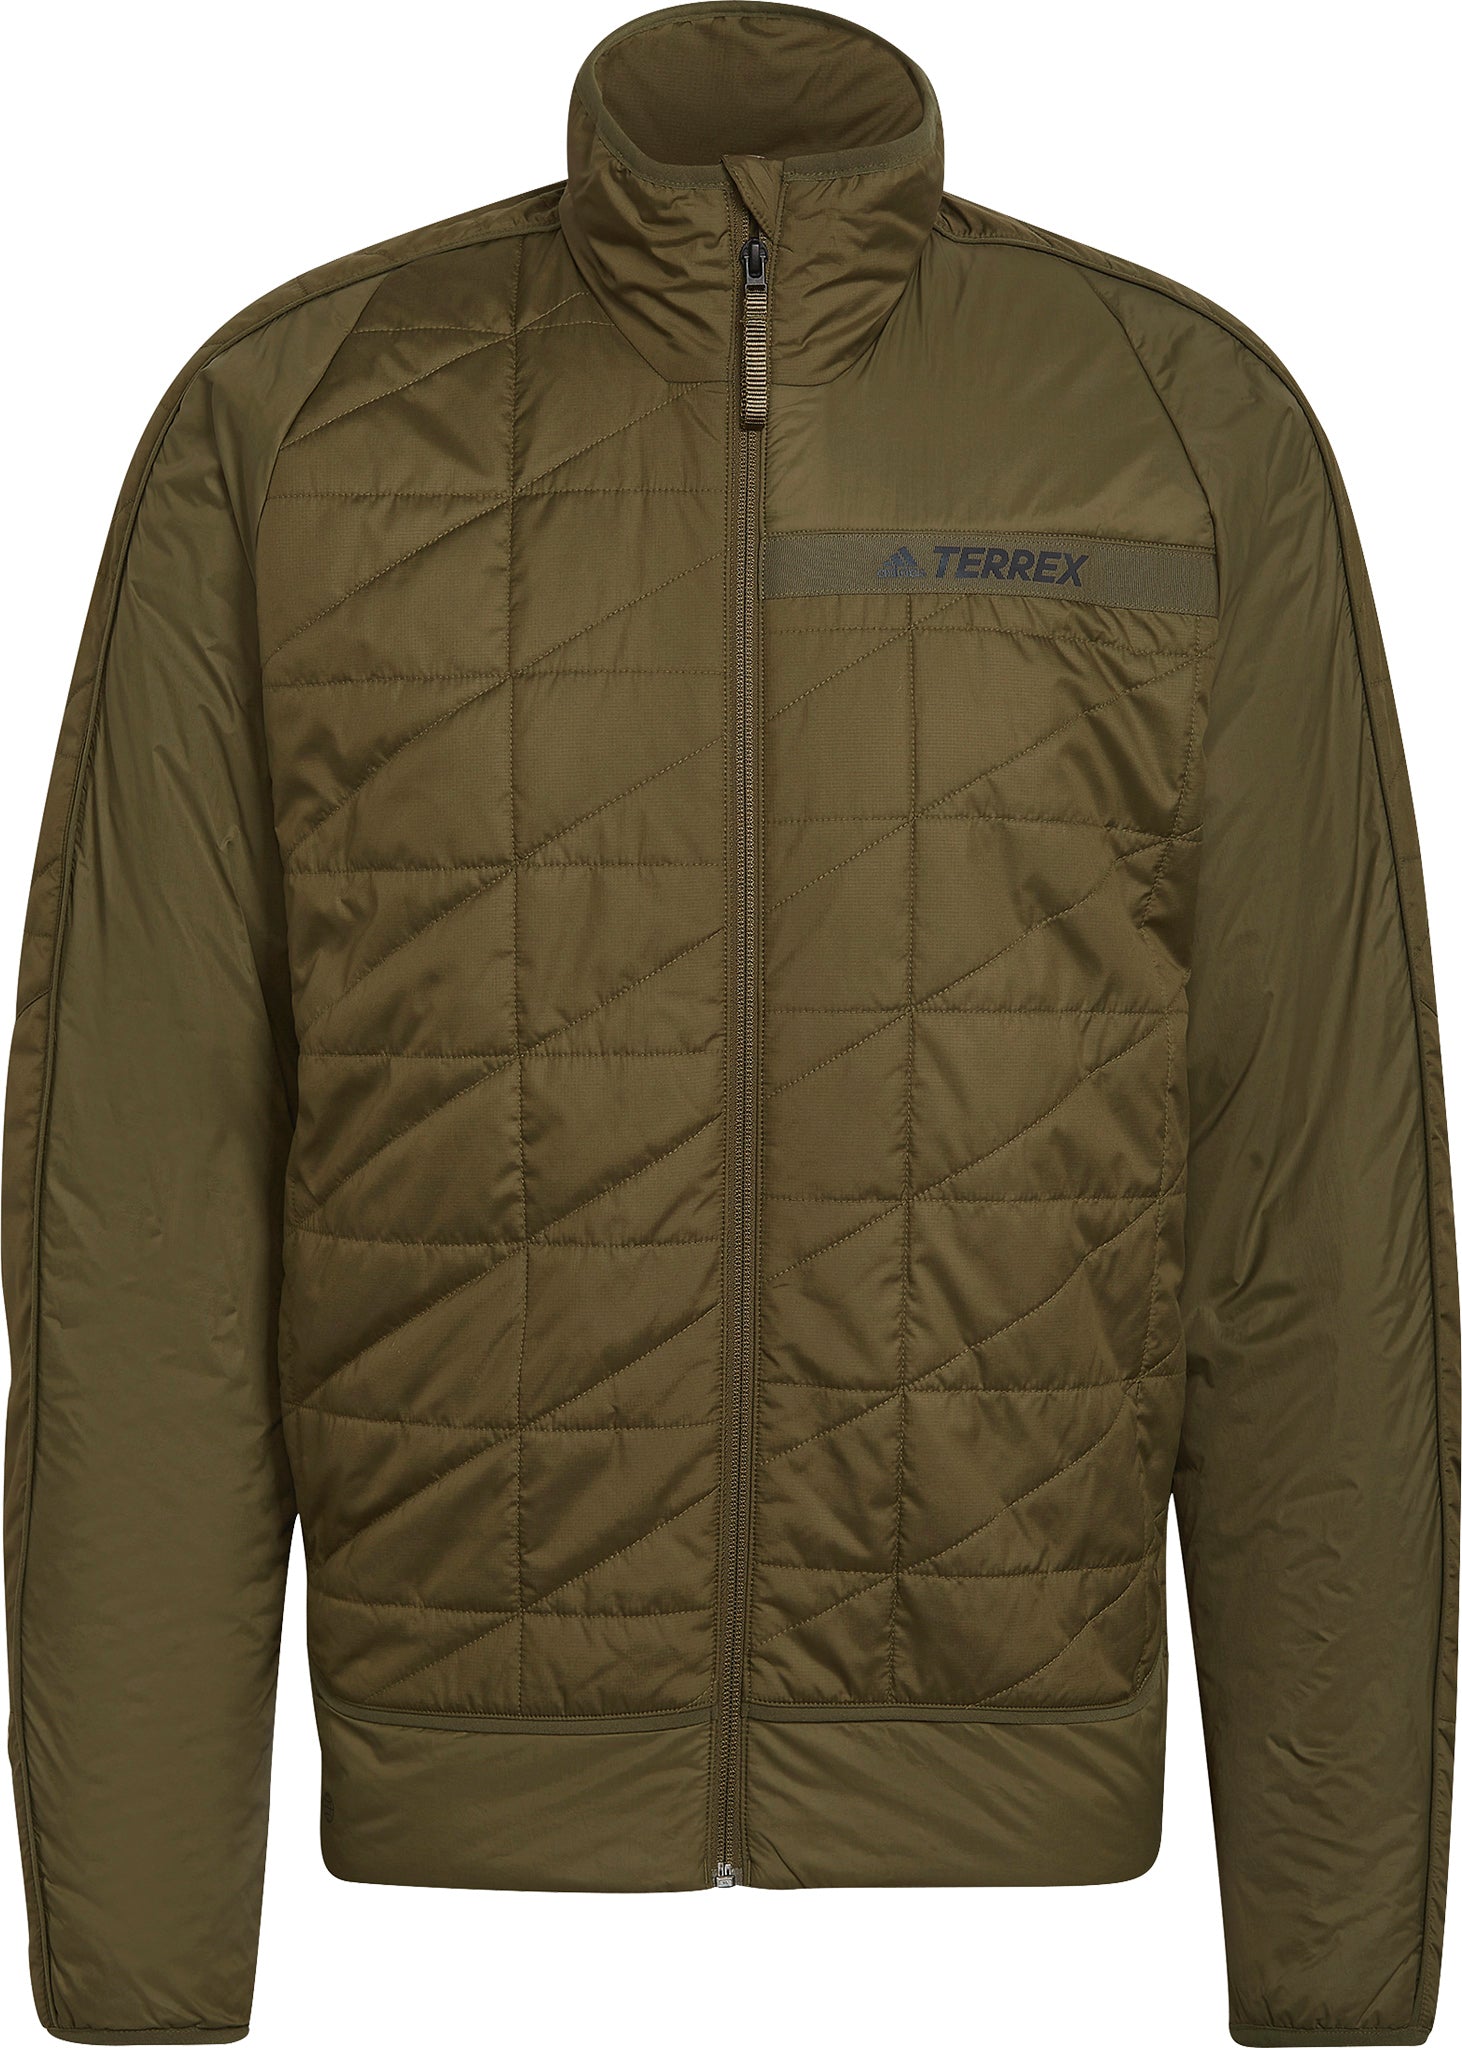 adidas Terrex Multi Synthetic Insulated Jacket - Men's | Altitude Sports